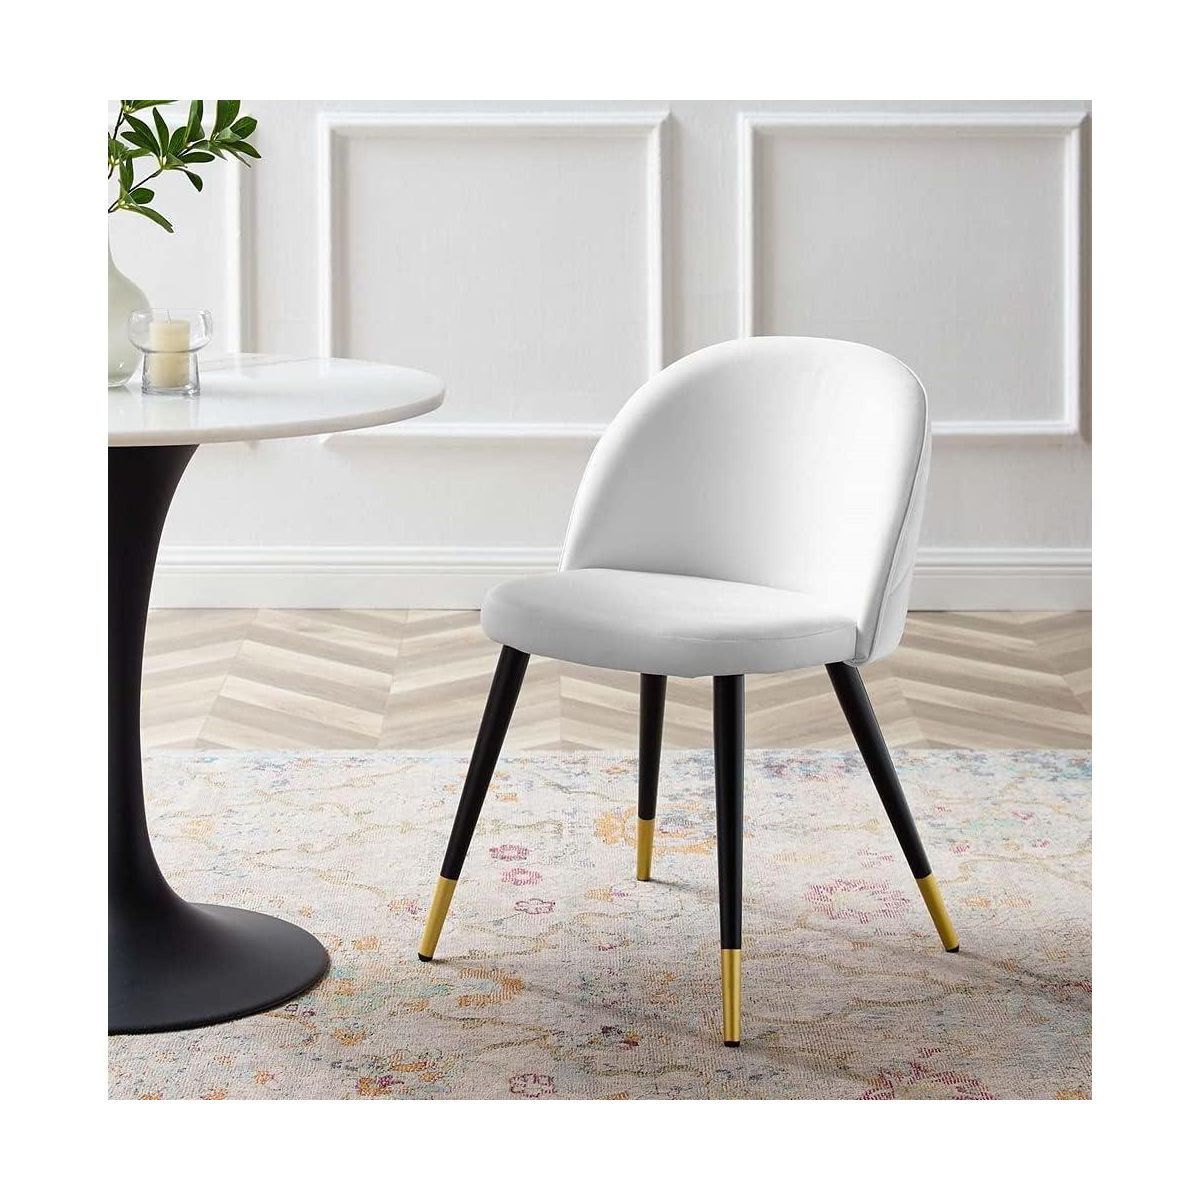 Modway Cordial Performance Velvet Dining Chairs - Set of 2 | Target